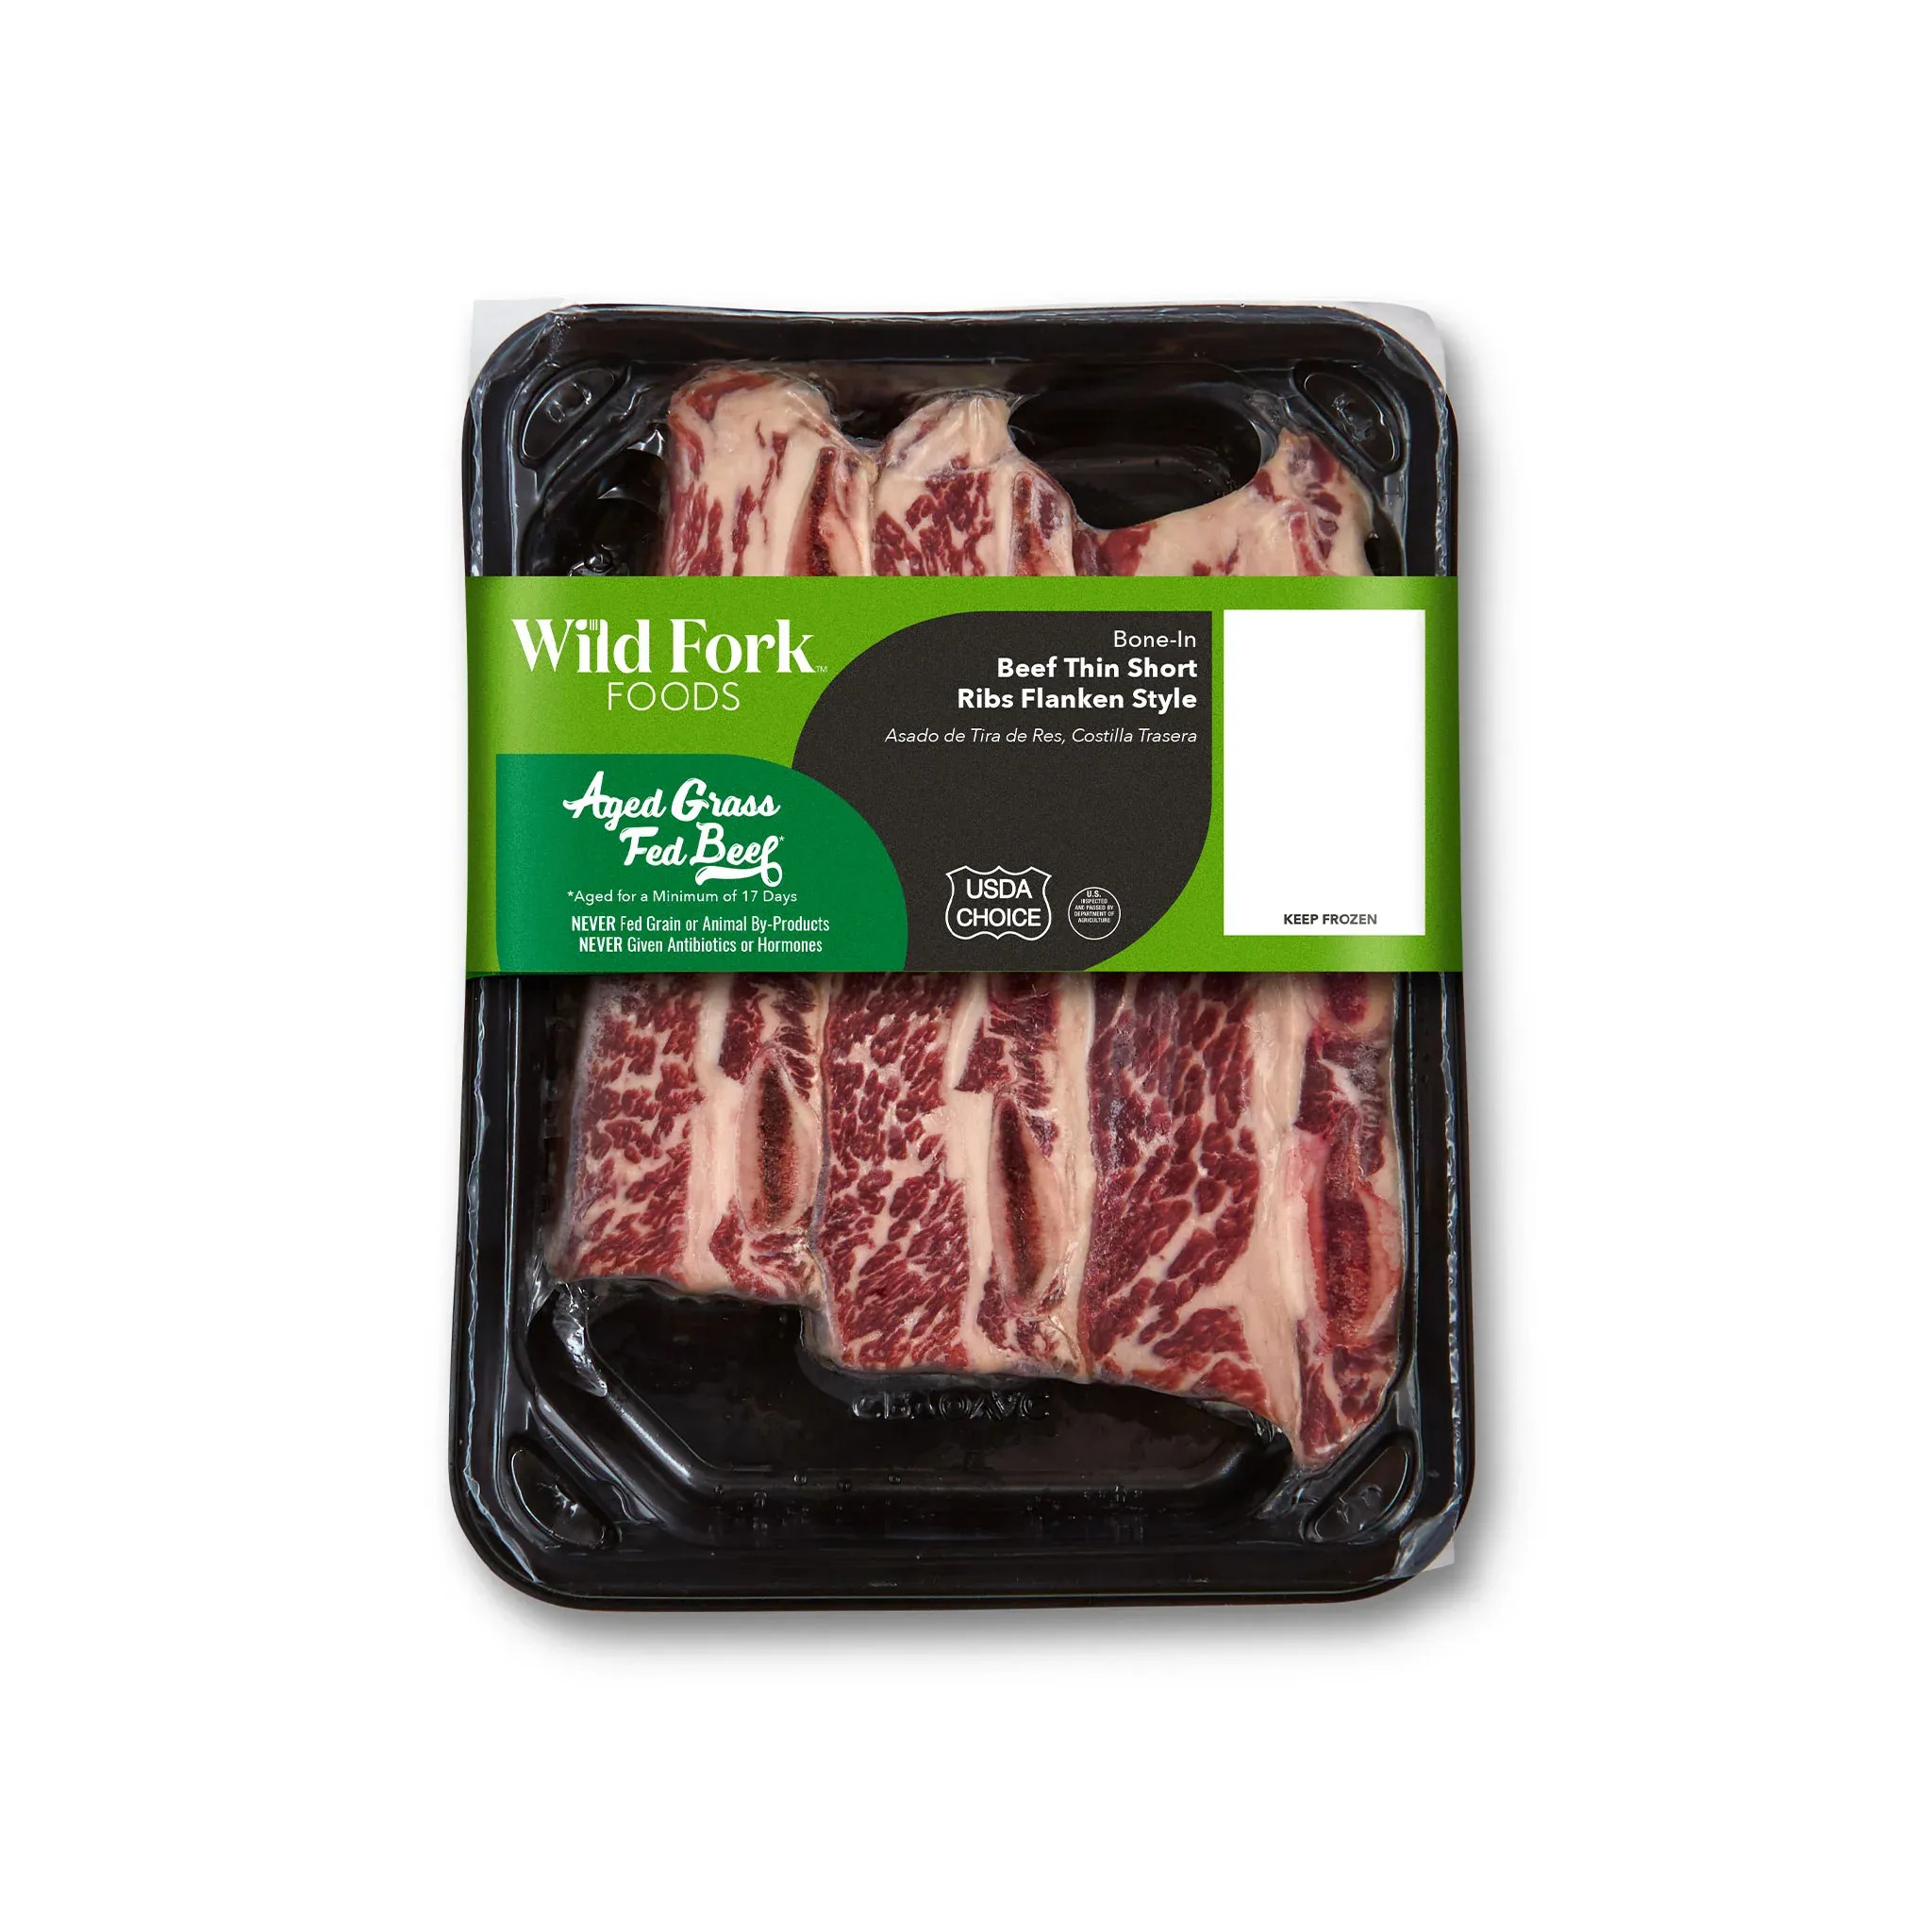 1612 WF PACKAGED USDA Choice Grass Fed Beef Bone-In Short Ribs Flanken Style BEEF